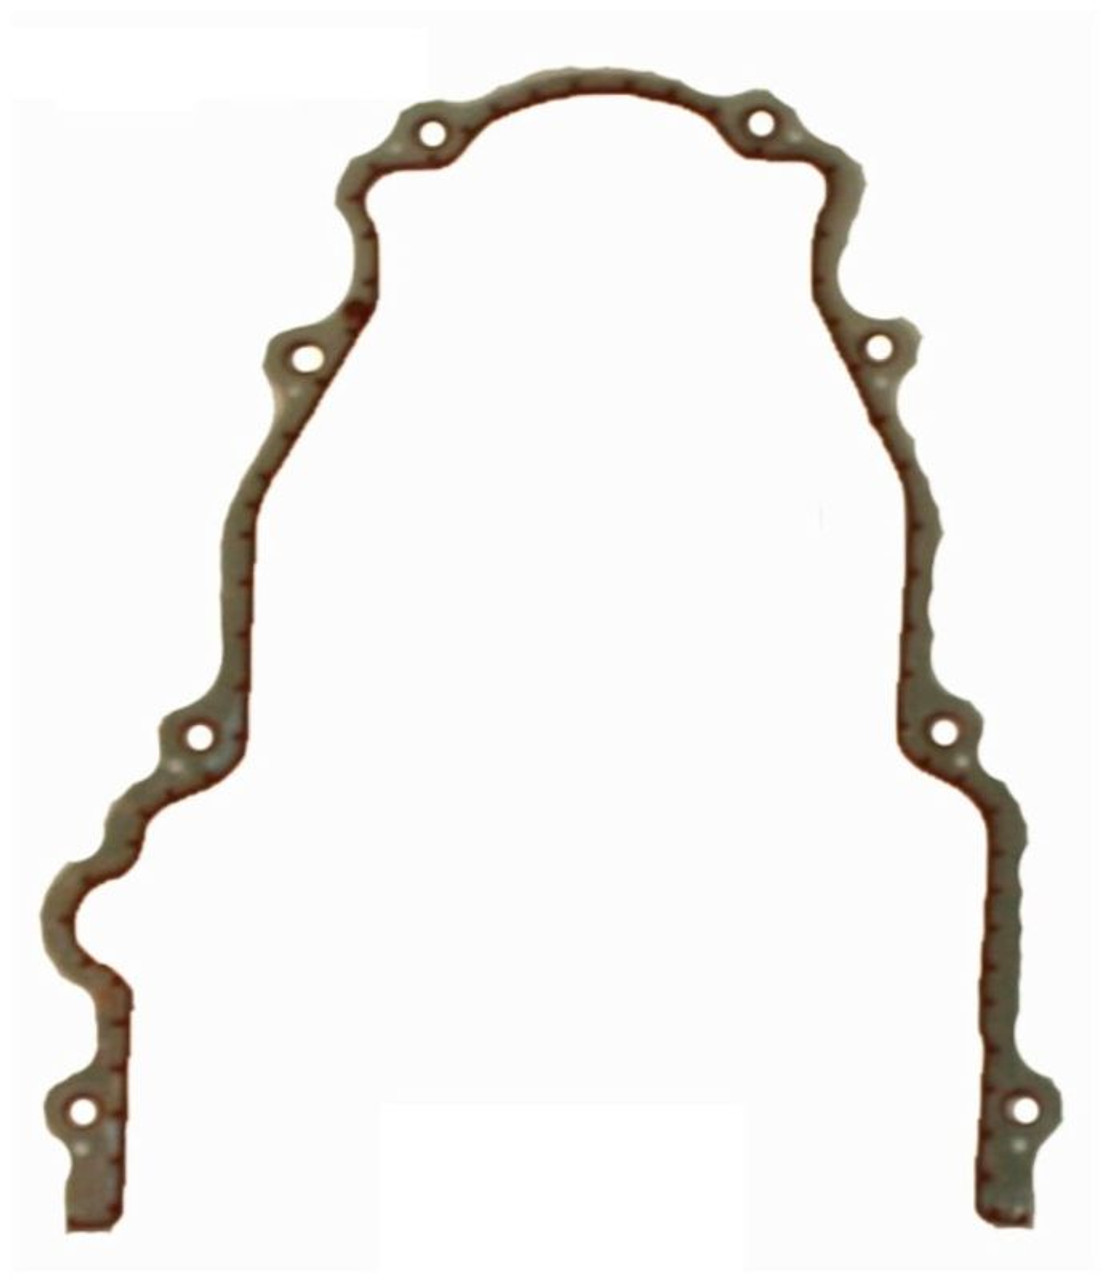 2004 GMC Sierra 2500 6.0L Engine Timing Cover Gasket TCG293-A -223